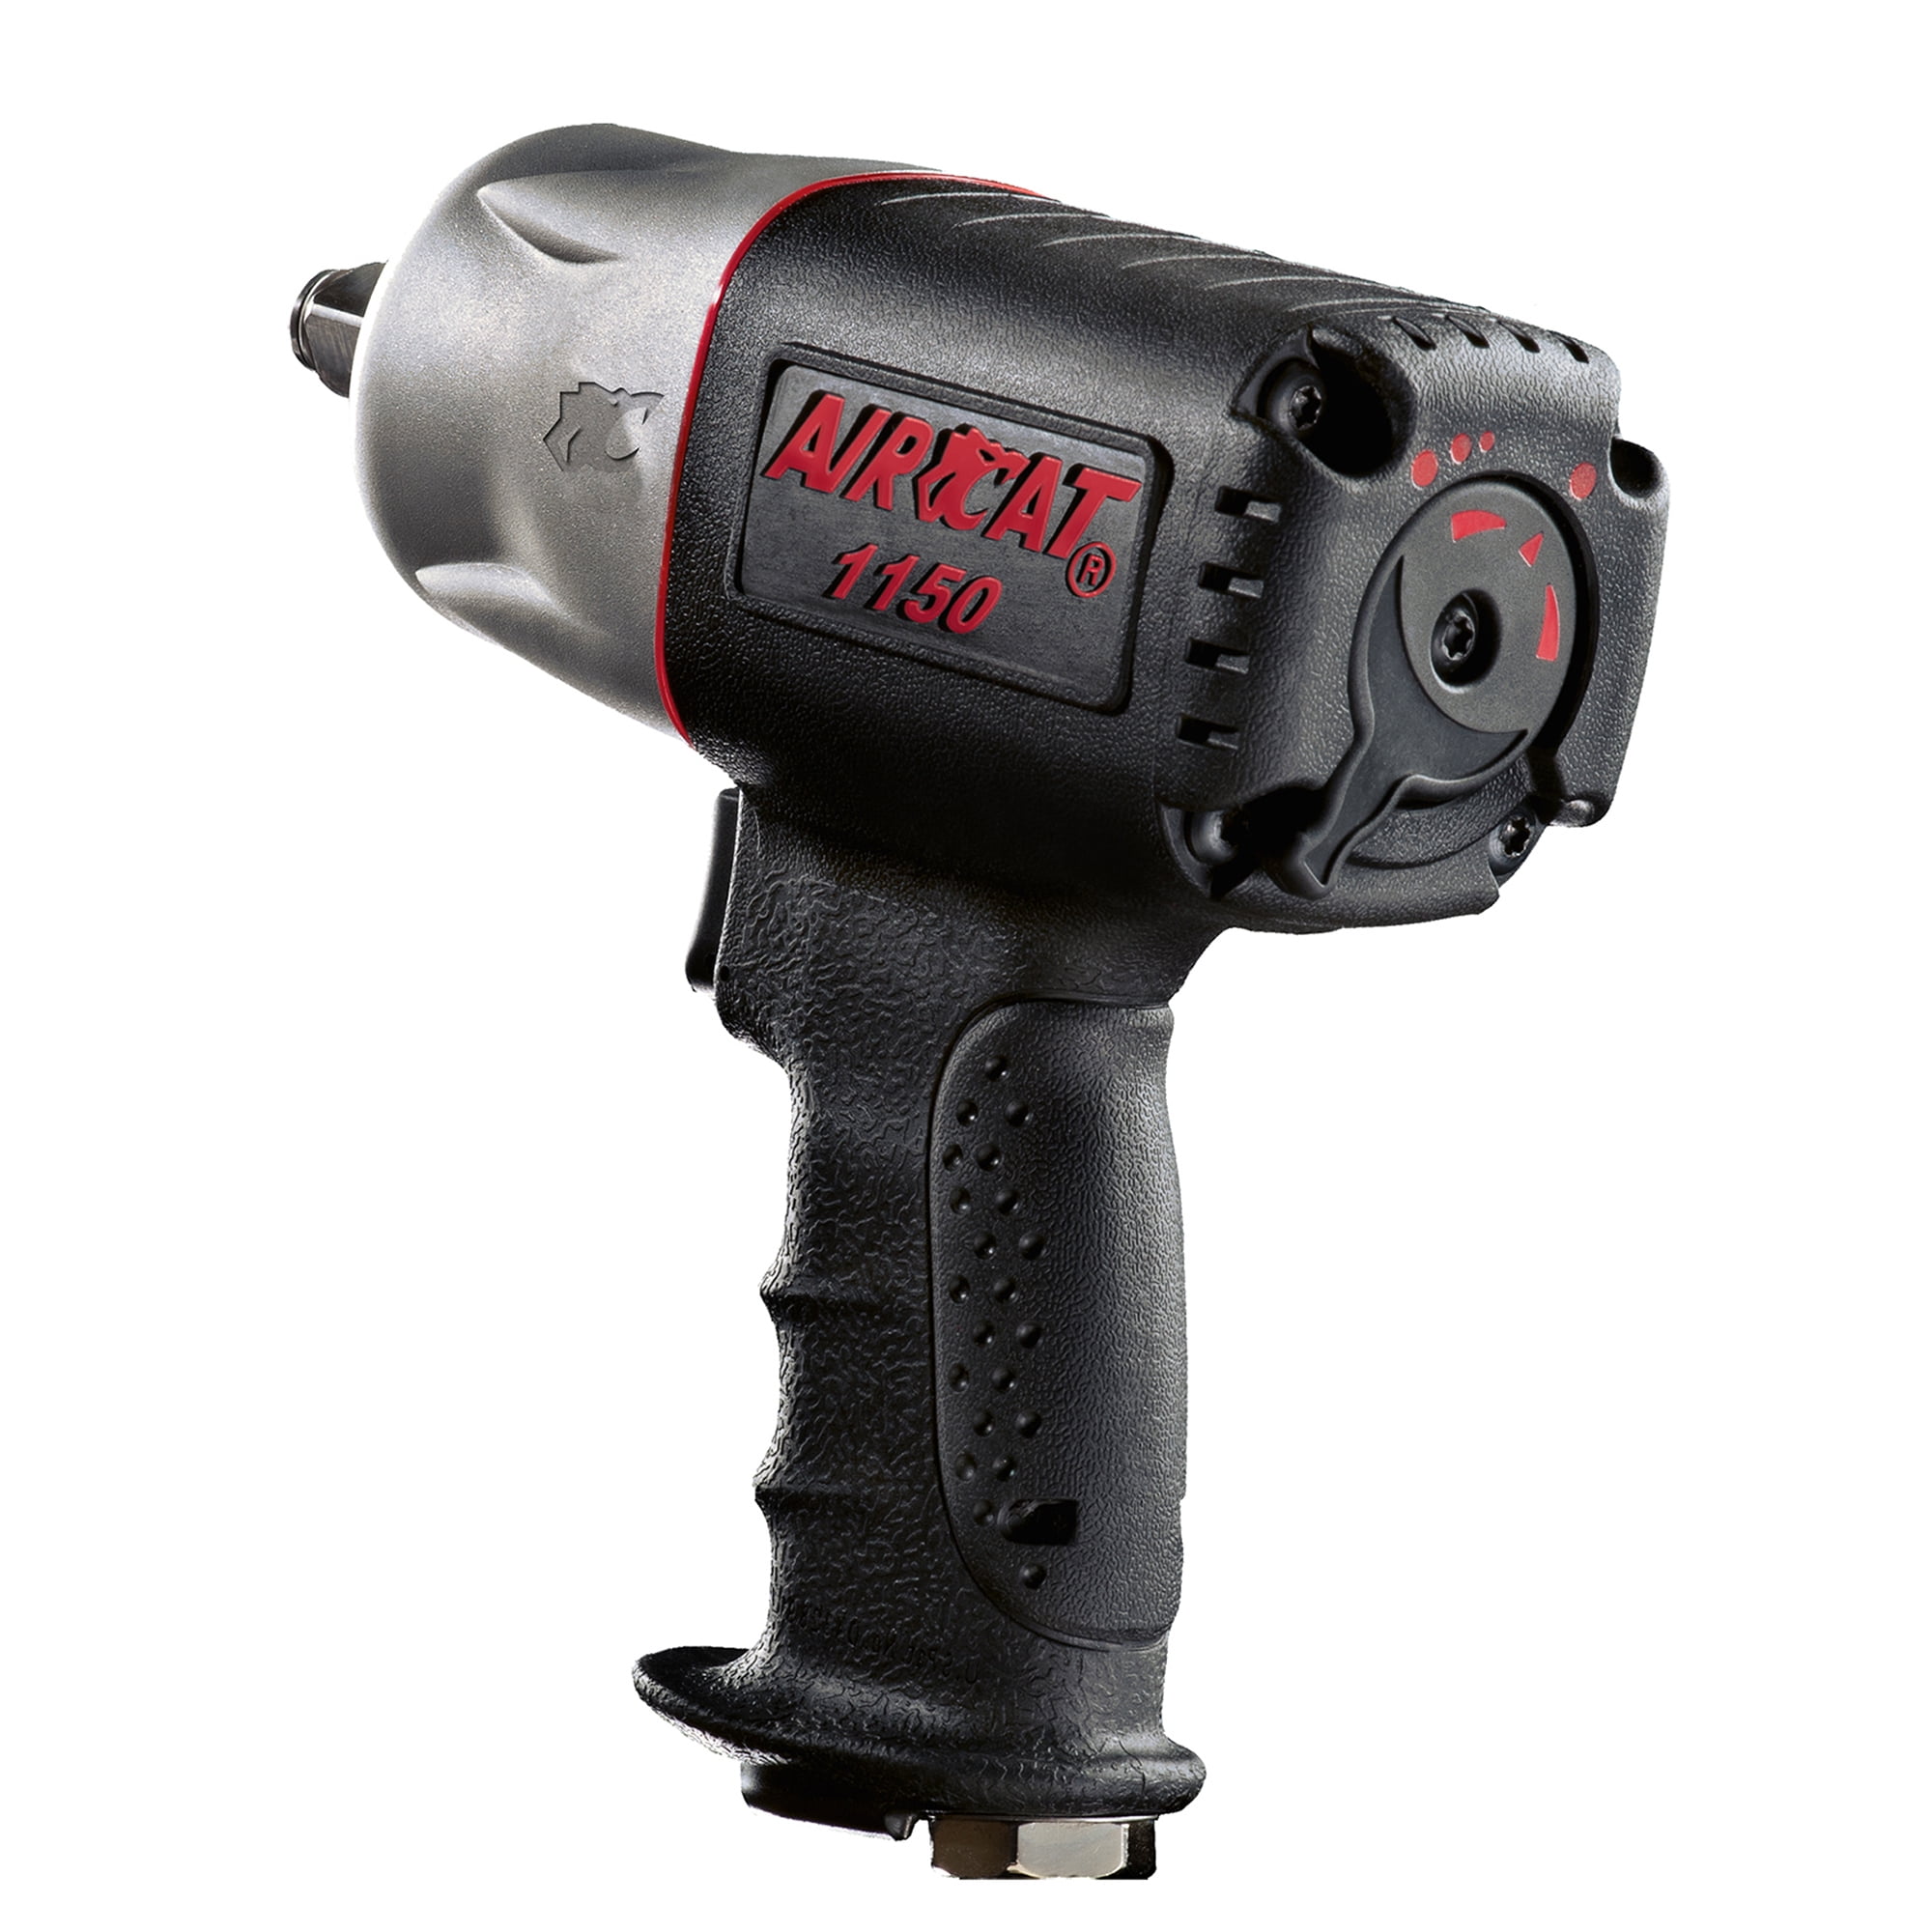 Ingersoll Rand Air Impact Wrench, 1/2 In. Drive 2235TiMax 